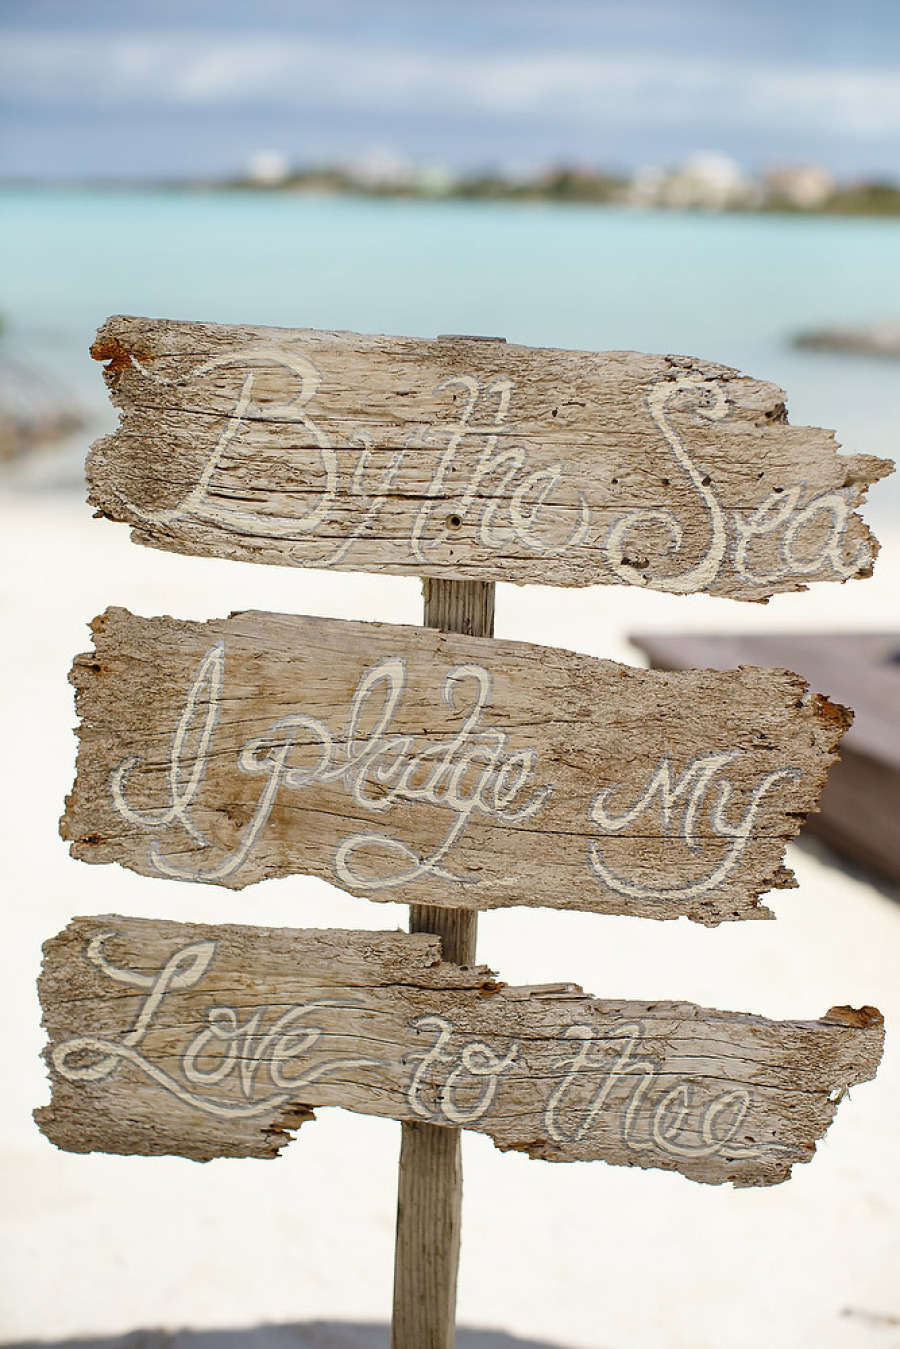 by the sea my love i pledge to thee sign beach wedding | photo: brilliant studios | via emmalinebride.com on how to decorate for beach wedding